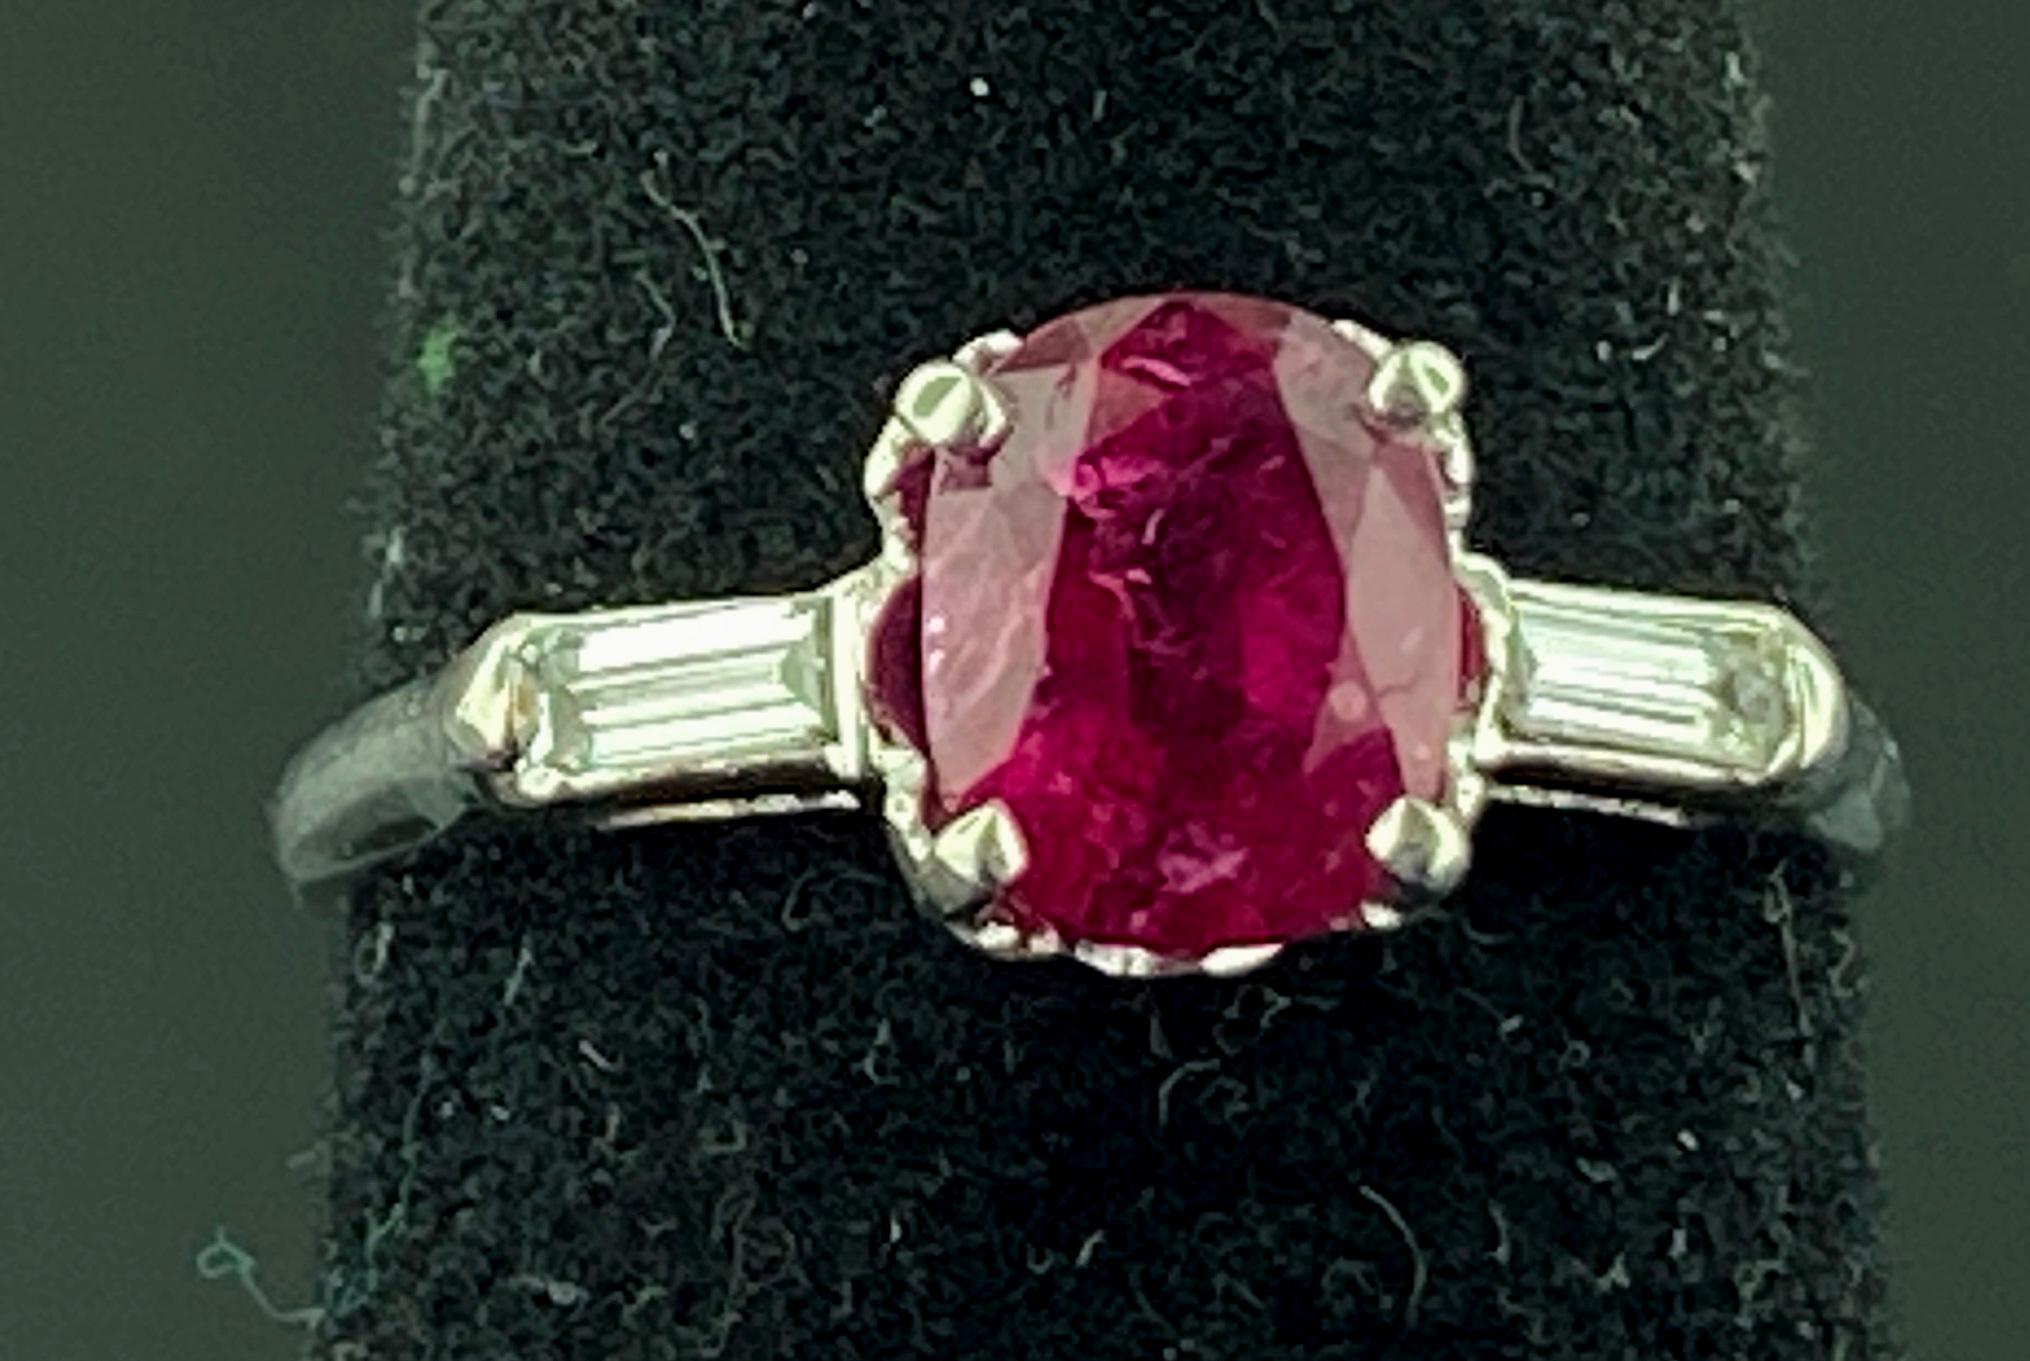 Set in Platinum is a 1.47 carat oval shaped Ruby center with two baguette cut diamonds on the sides with a total diamond weight of 0.10 carats.  Ring size is 6.5